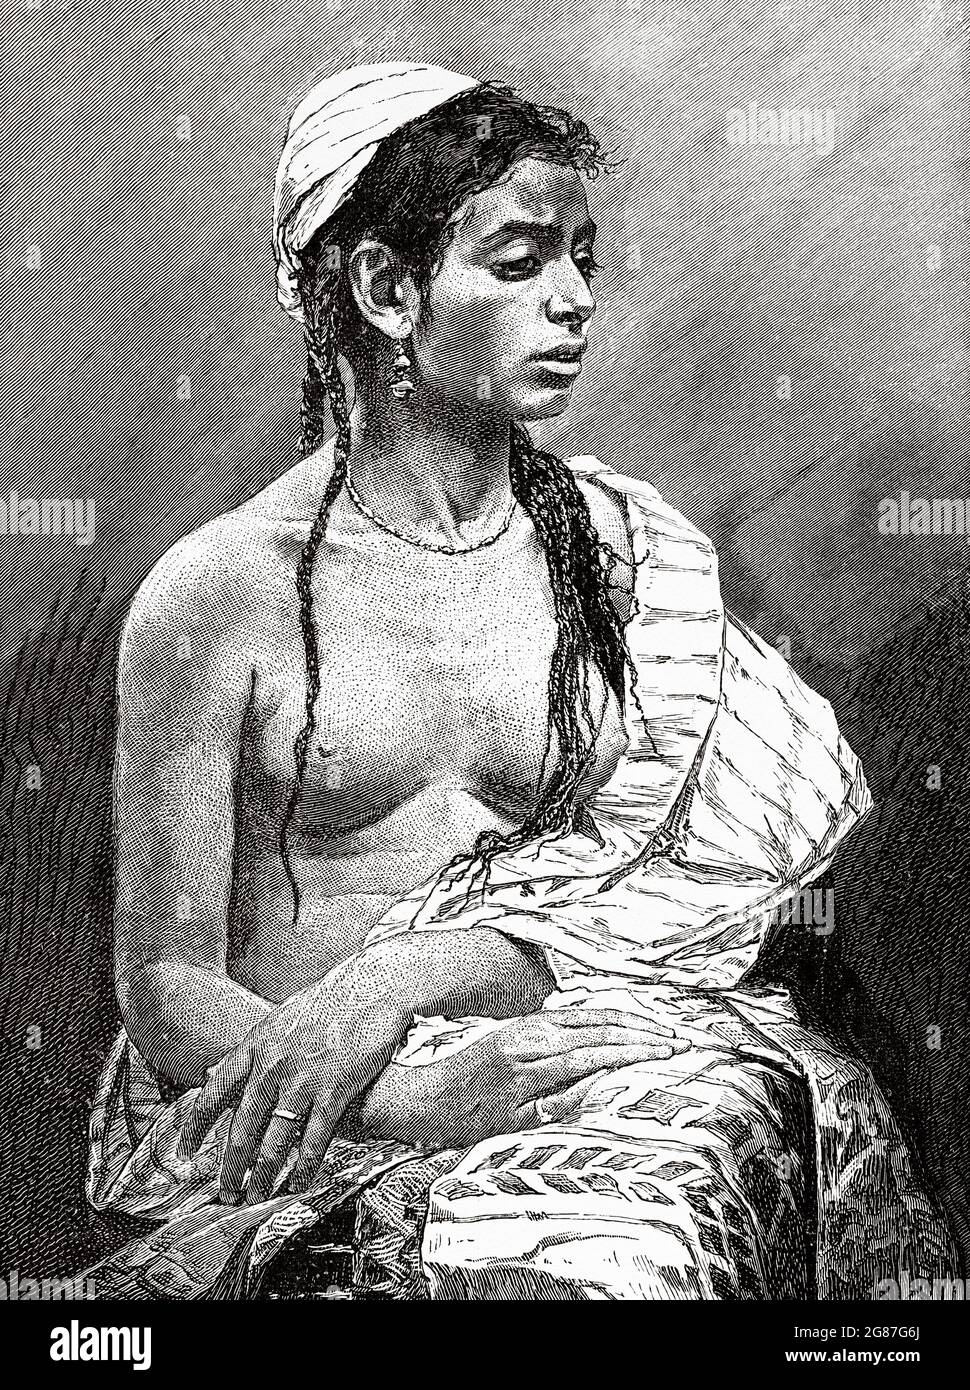 Hamida. Young, beautiful, poor and ambitious girl who dreams of marrying some rich man, Egypt, North Africa. Old 19th century engraved illustration from El Mundo Ilustrado 1880 Stock Photo